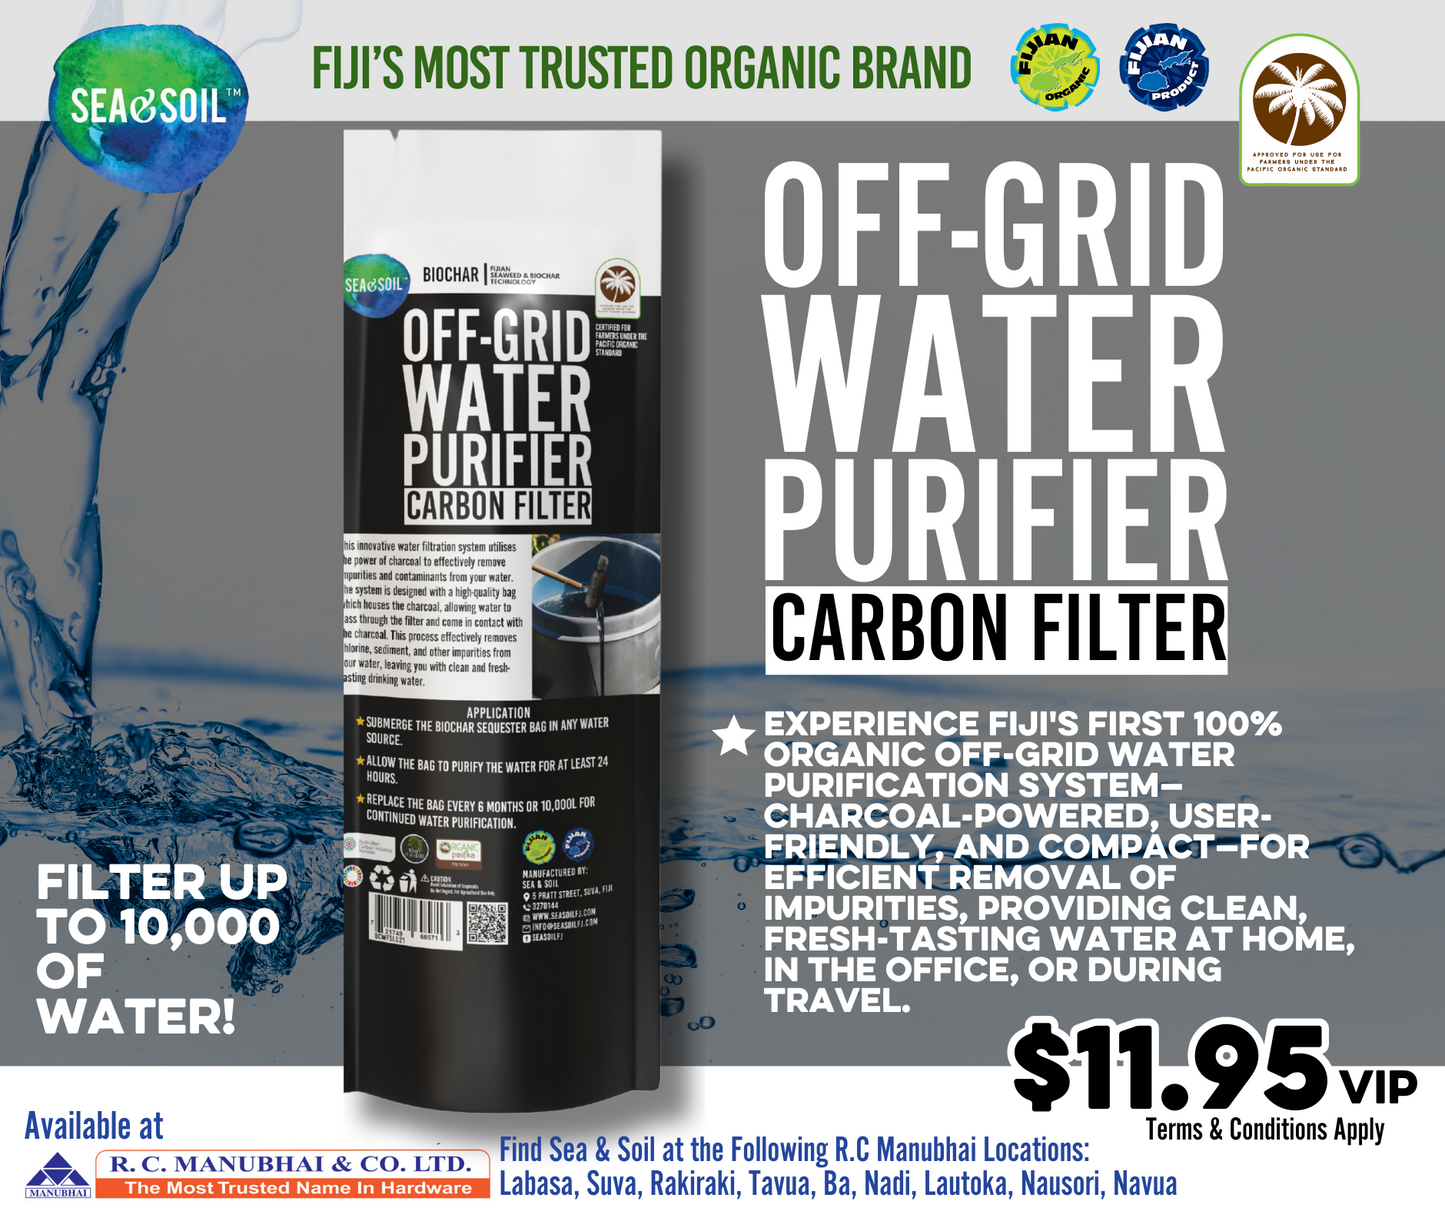 Off-Grid Water Purifier: Carbon Filter